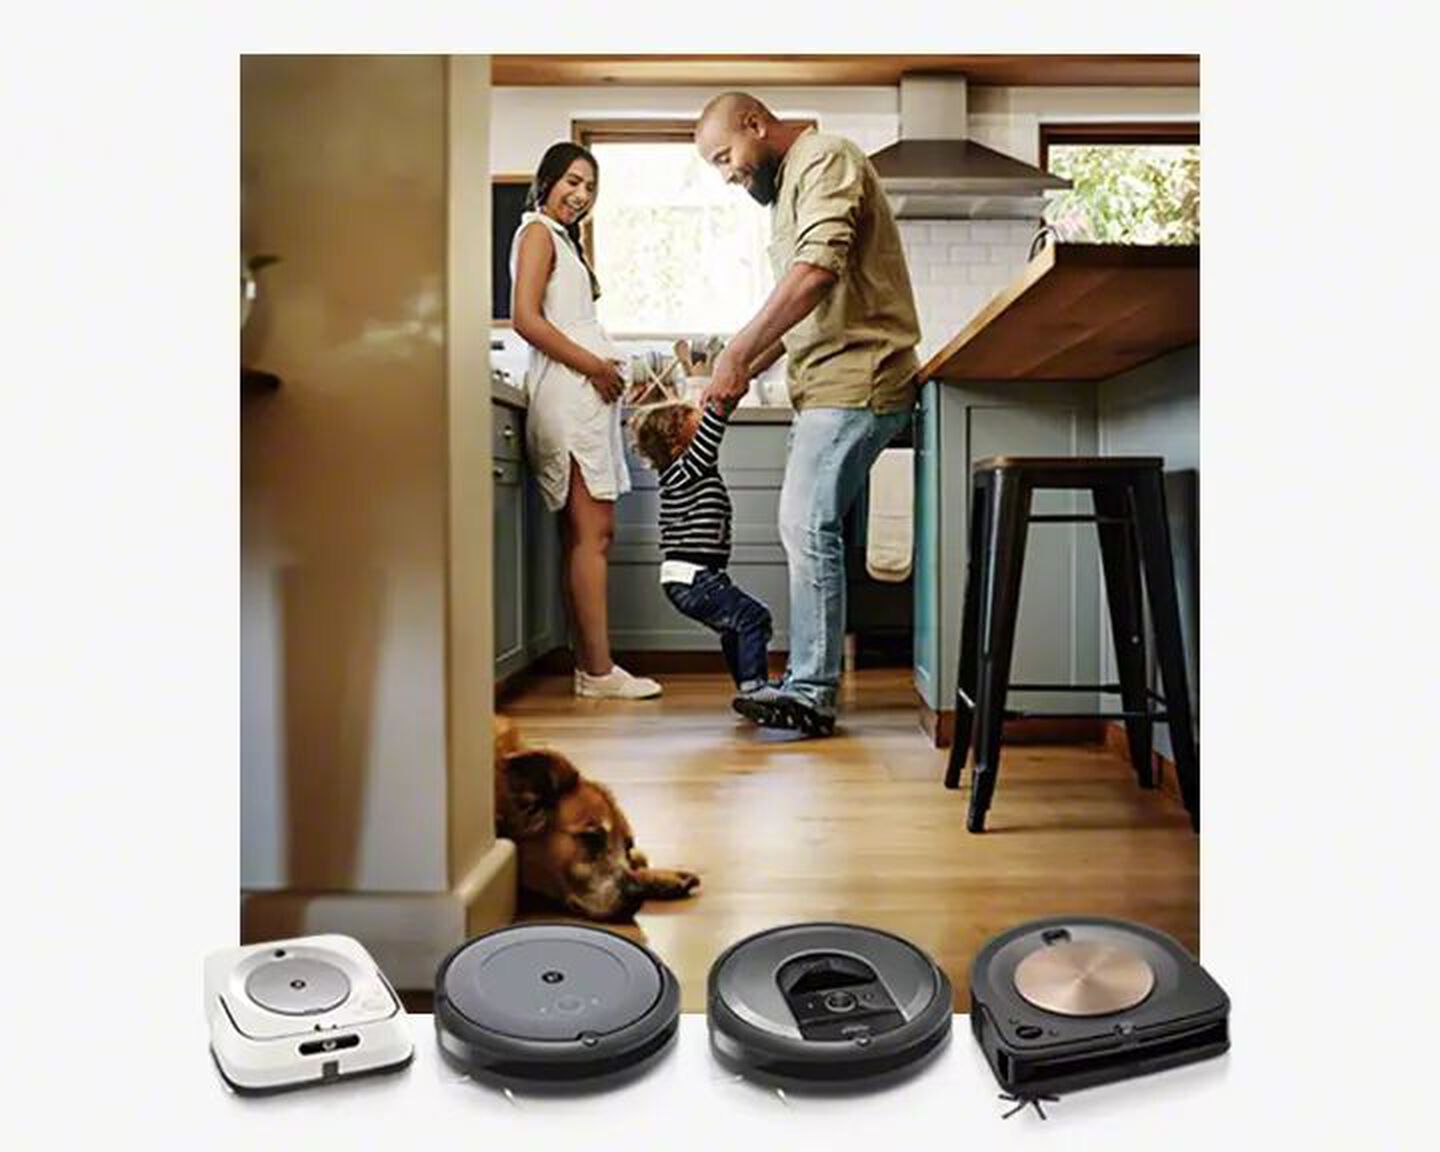 A family plays in the kitchen behind images of iRobot’s collection of robot vacuums and mops.